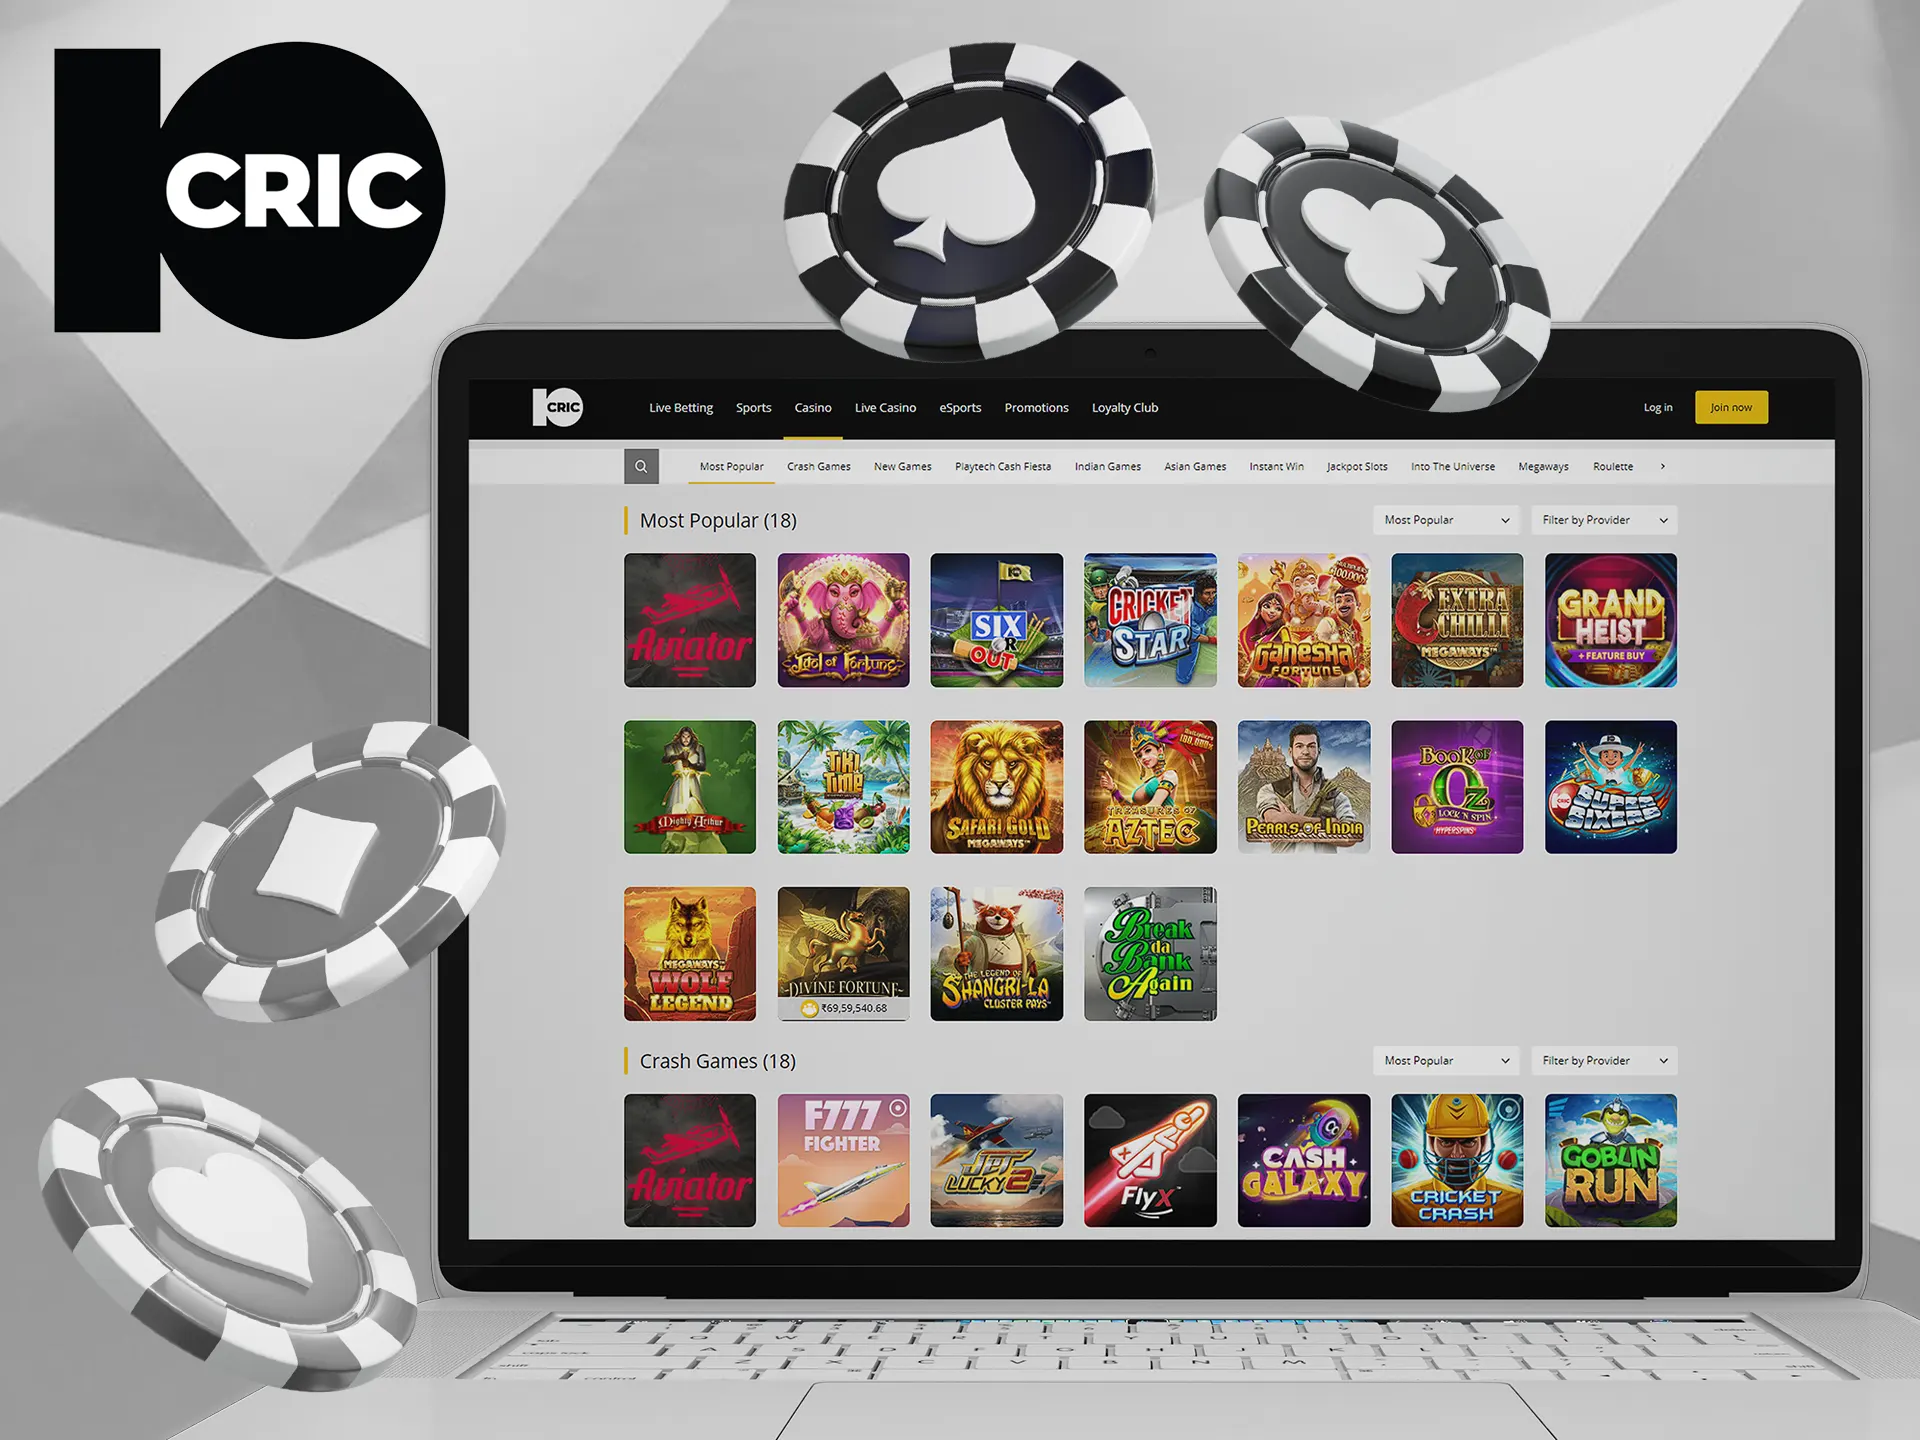 10cric casino is a great place for playing casino games.